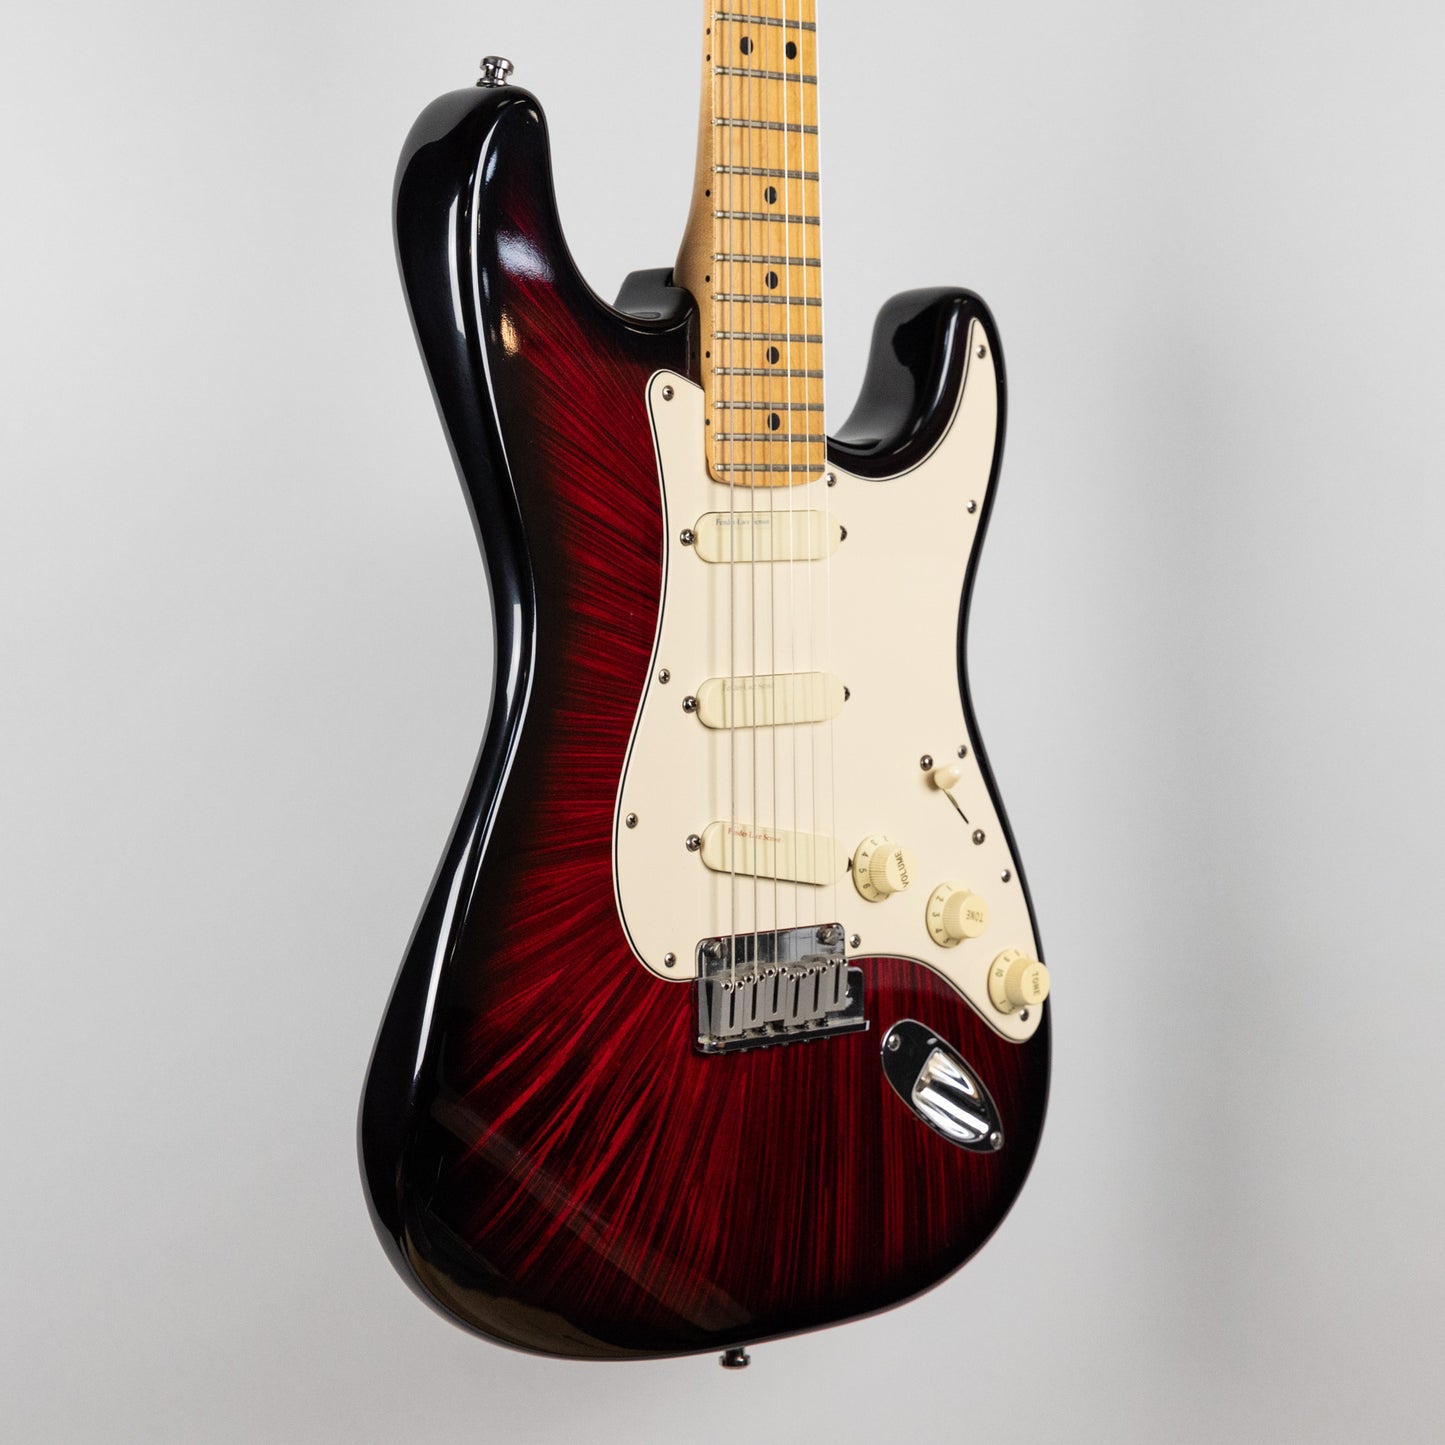 Used 1991 Fender Stratocaster Plus Deluxe with Firestorm Finish